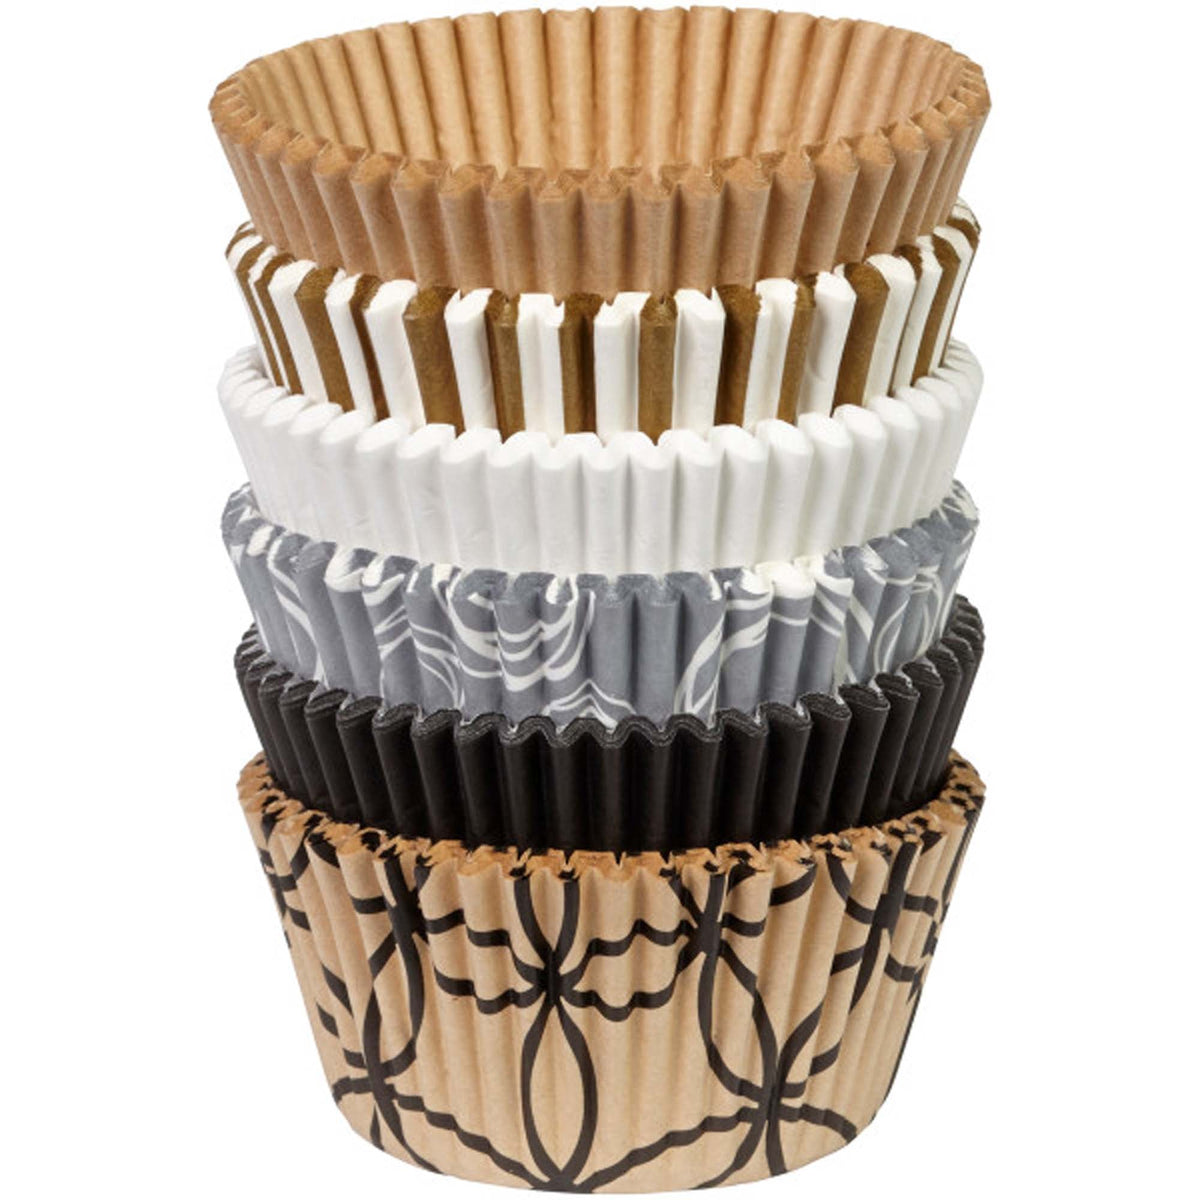 WILTON INDUSTRIES Cake Supplies Celebrate Cupcakes Baking Cups, Brown, White & Grey, 150 Count